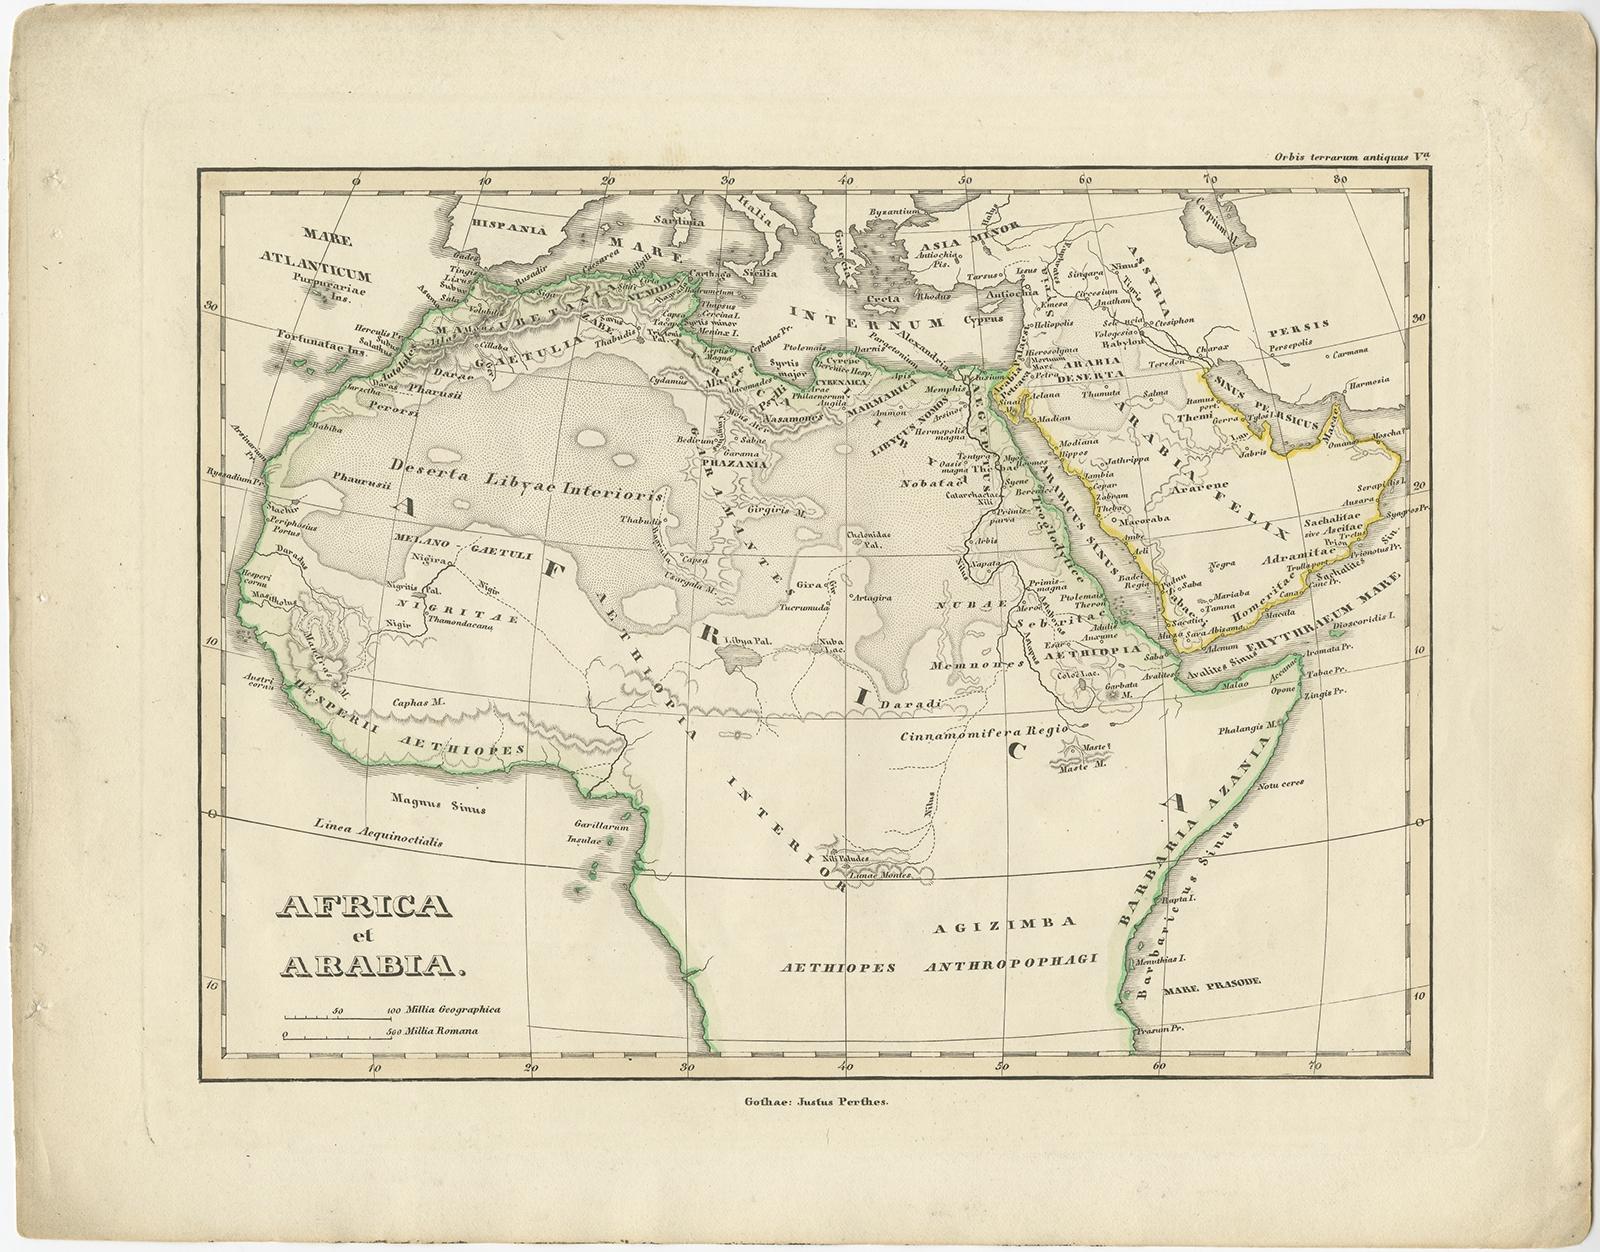 Antique map titled 'Africa et Arabia'. 

Old map of Africa and Arabia originating from 'Orbis Terrarum Antiquus in usum Scholarum'. 

Artists and Engravers: Published by Justus Perthes, 1848.

Condition: Good, general age-related toning. Minor